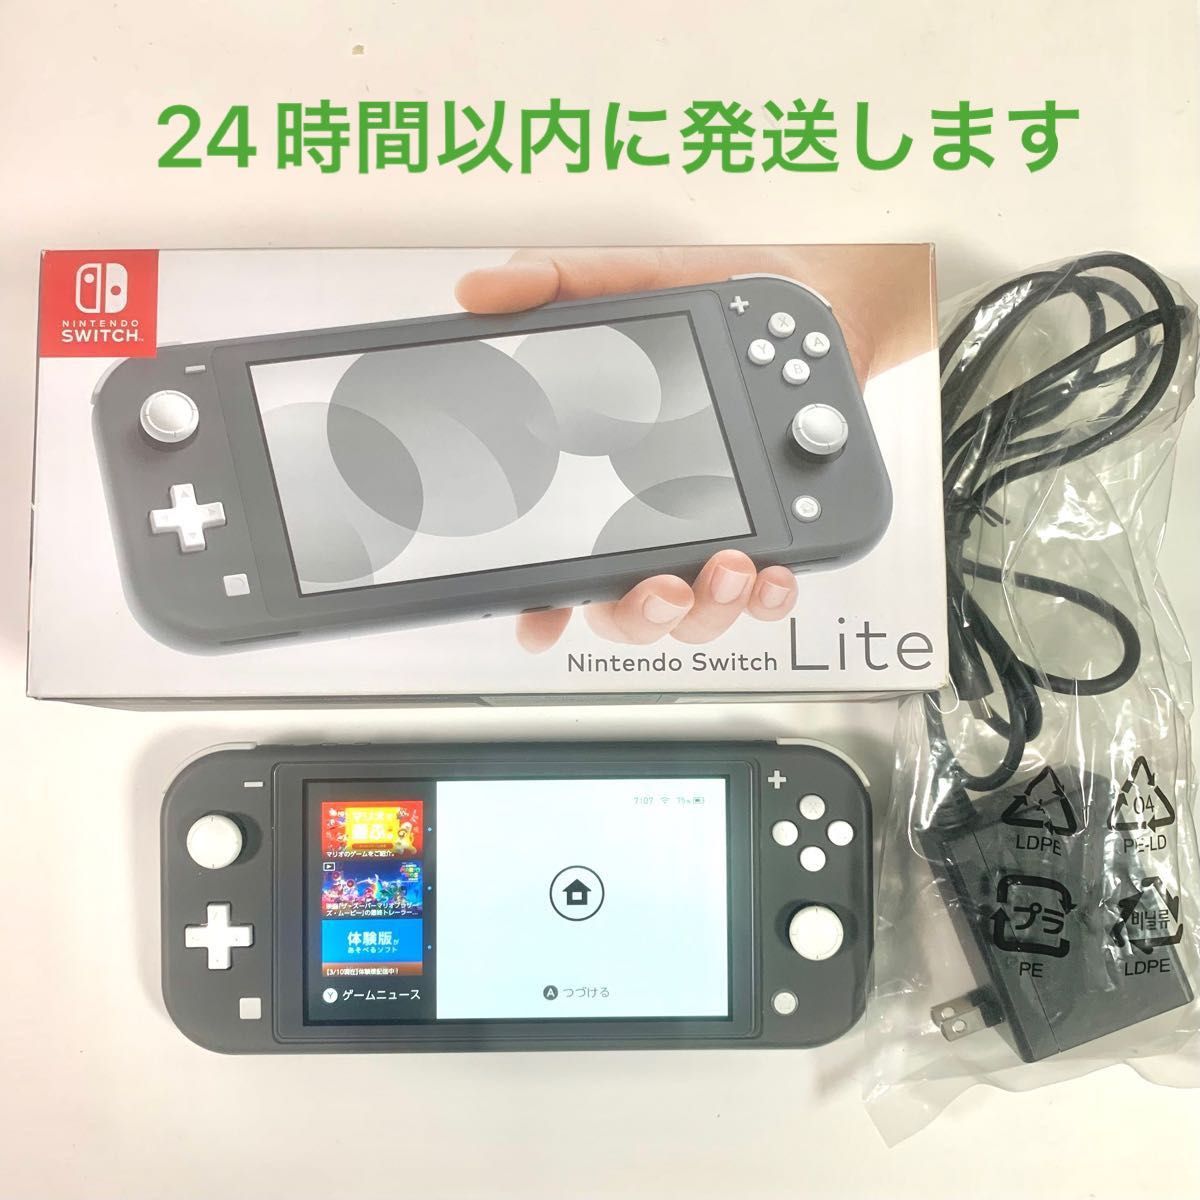 Nintendo switch lite スイッチ ライト グレー 箱充電器付き｜PayPayフリマ